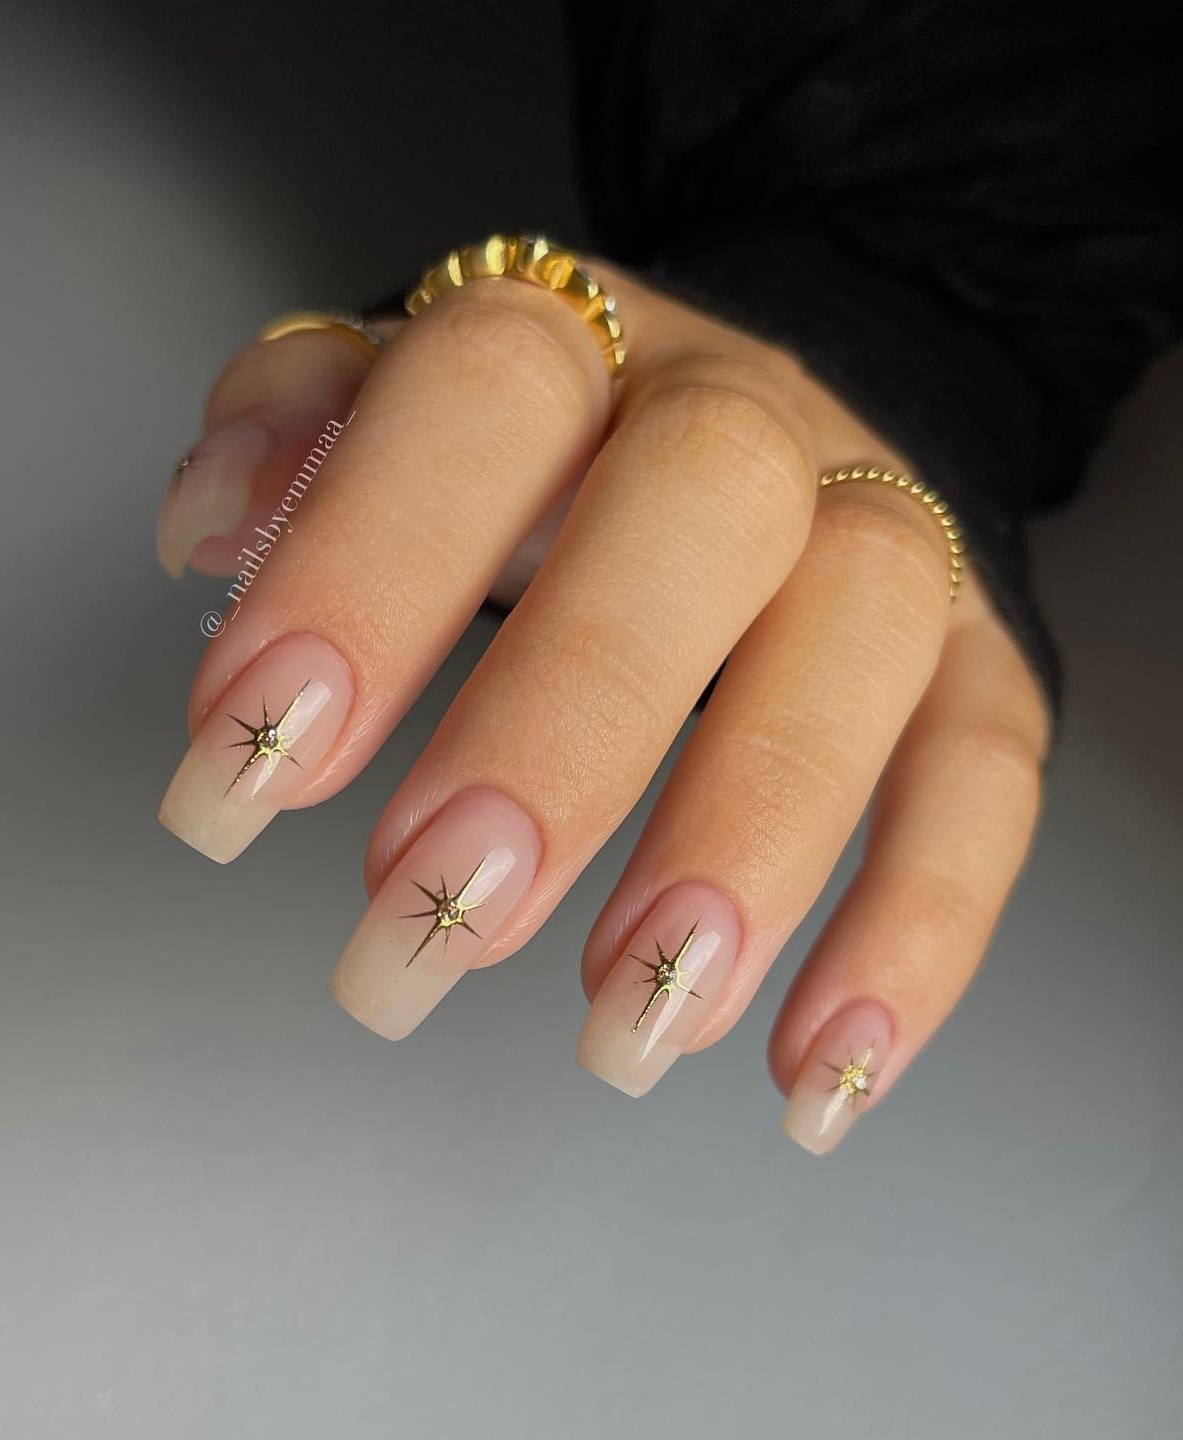 Clear Nails with Star Design